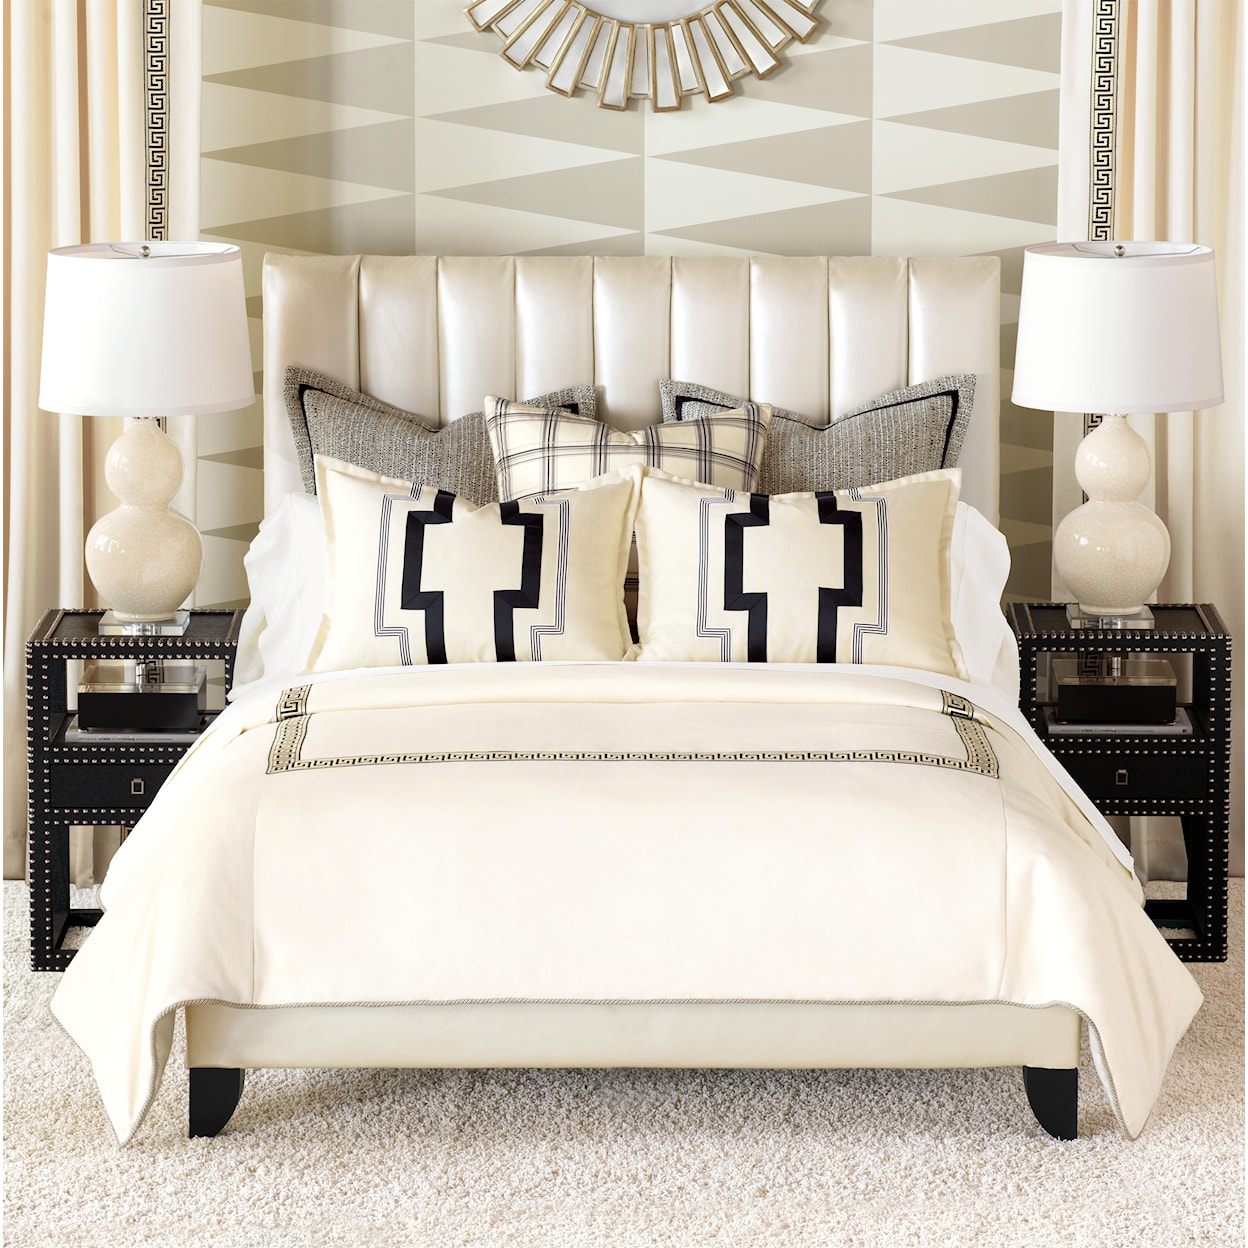 Eastern Accents Abernathy Queen Button-Tufted Comforter